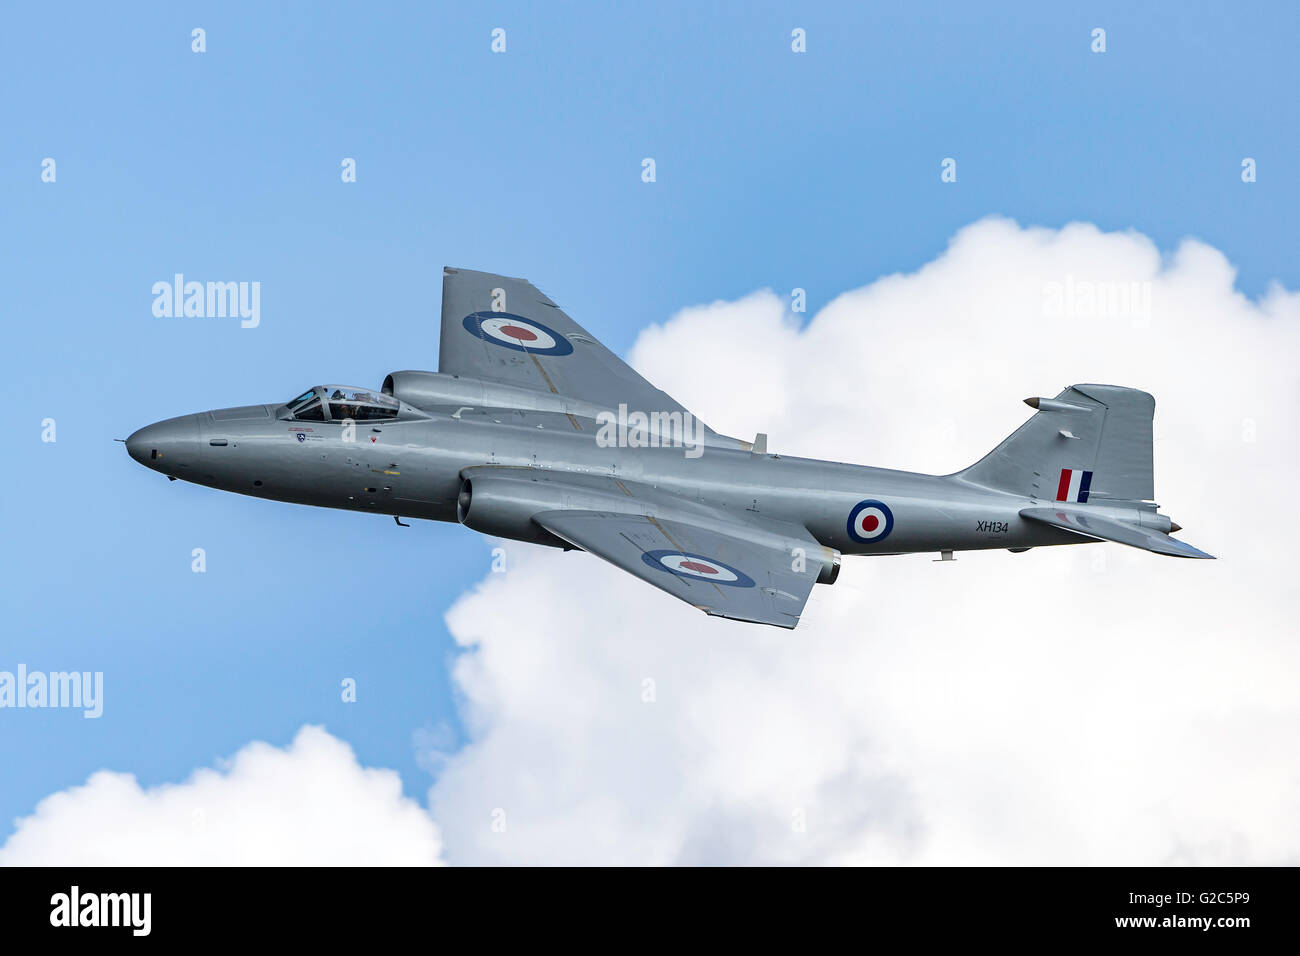 English Electric Canberra PR.9 G-OMHD operated by the Midair Squadron displaying at the RAF Waddington airshow. Stock Photo